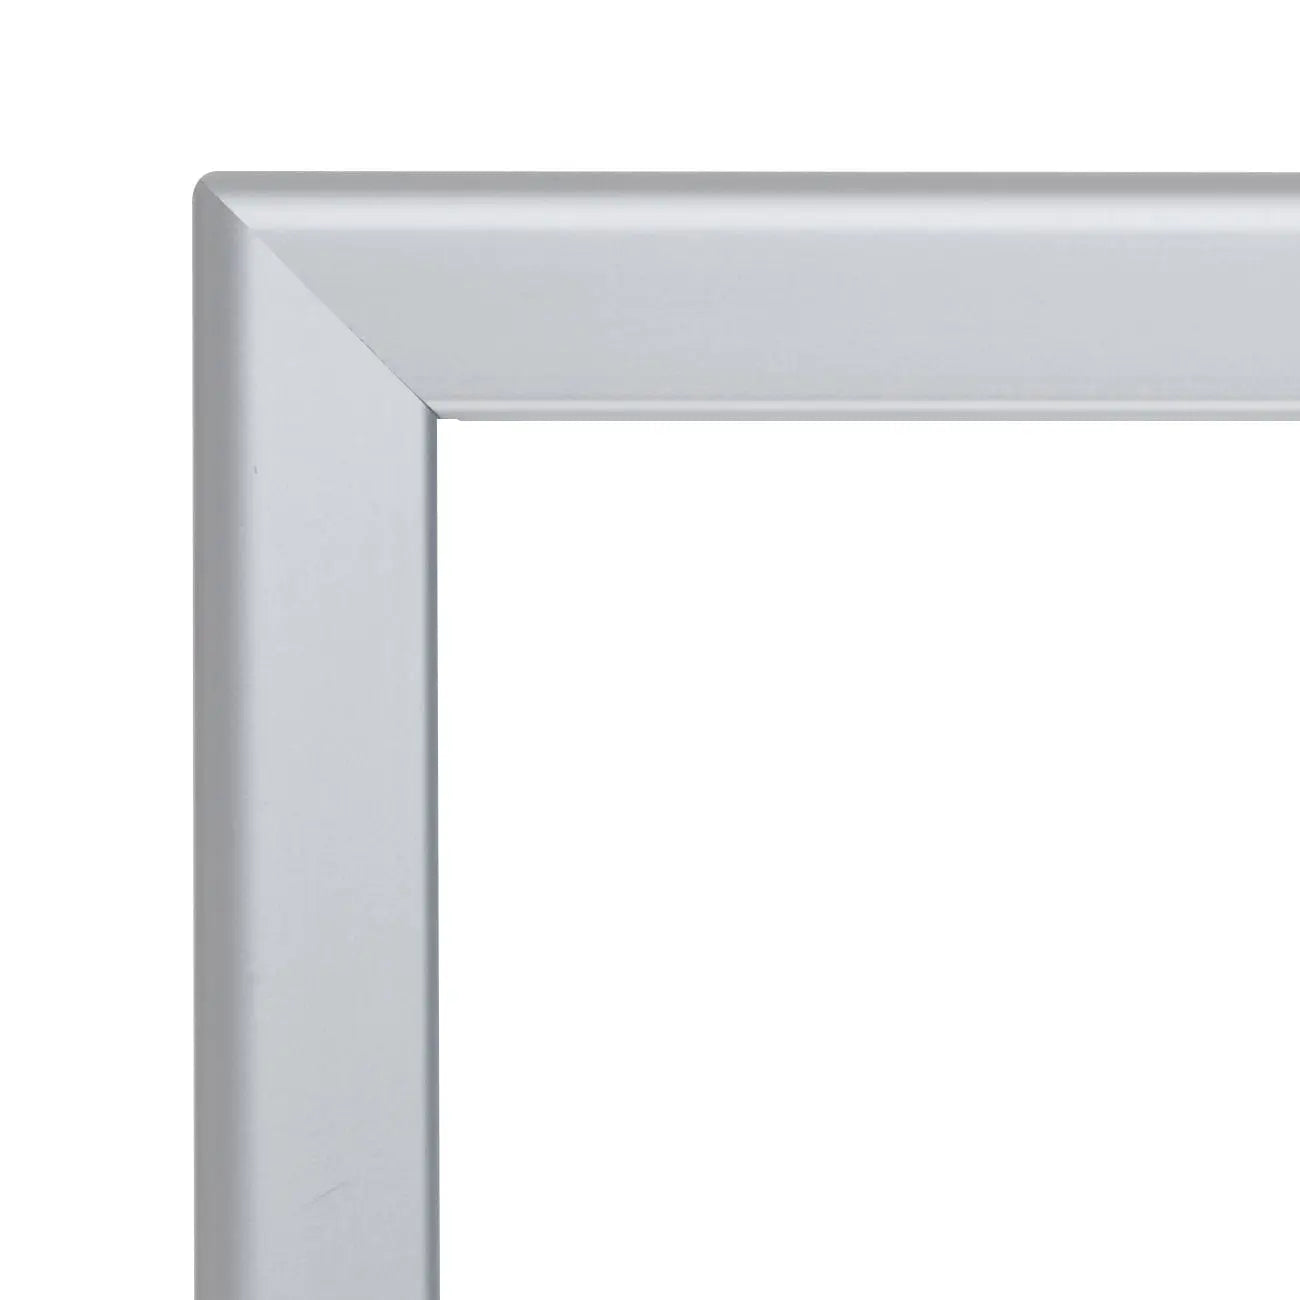 18x24 Silver Snap Frame - 1.25" Profile - Snap Frames Direct